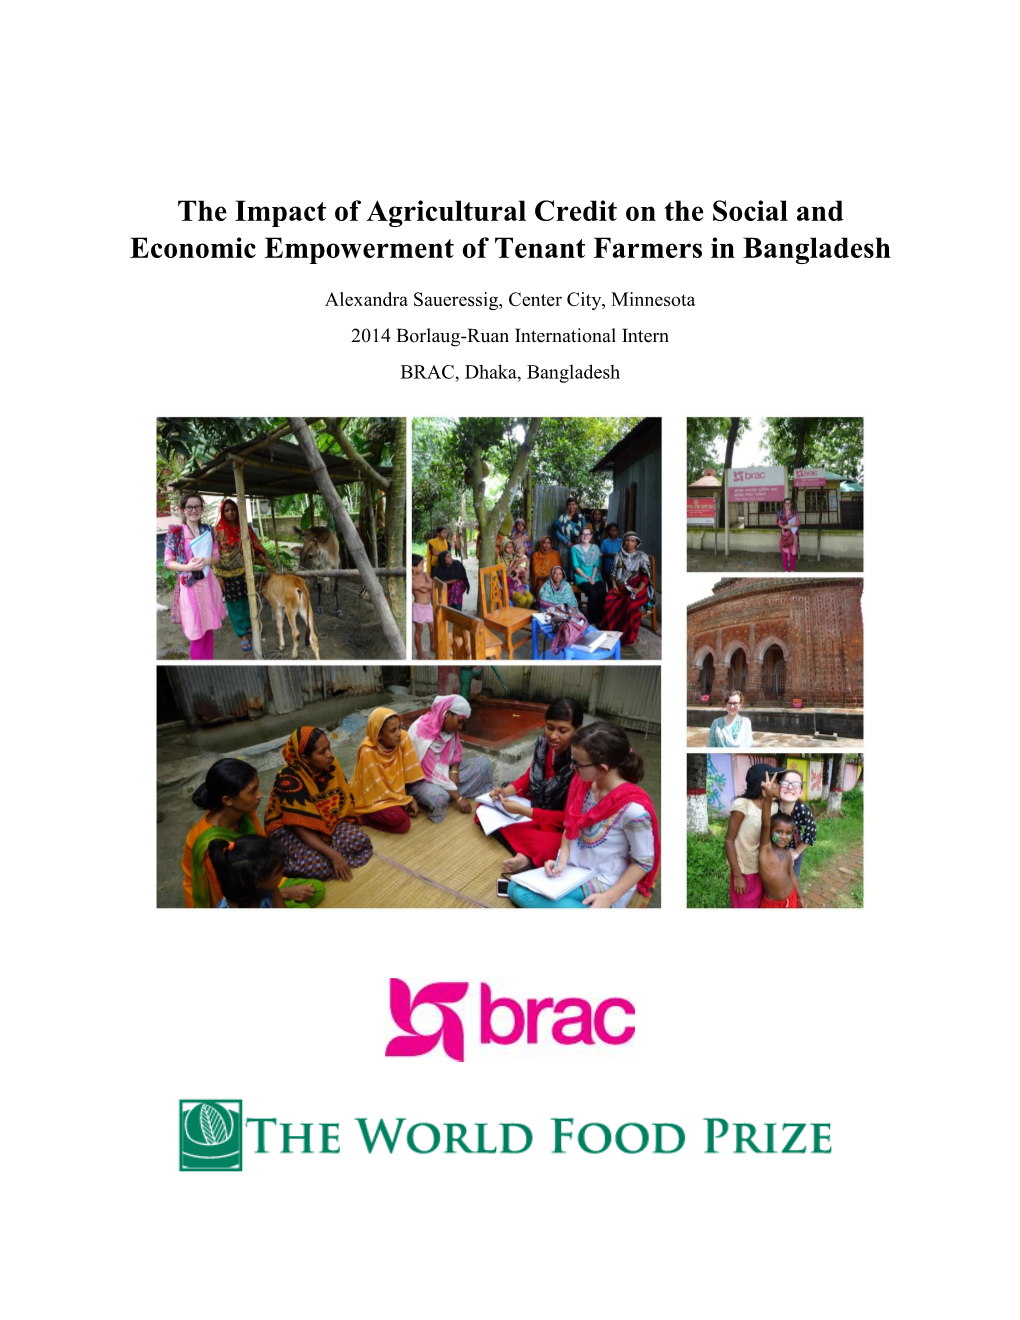 The Impact of Agricultural Credit on the Social and Economic Empowerment of Tenant Farmers in Bangladesh